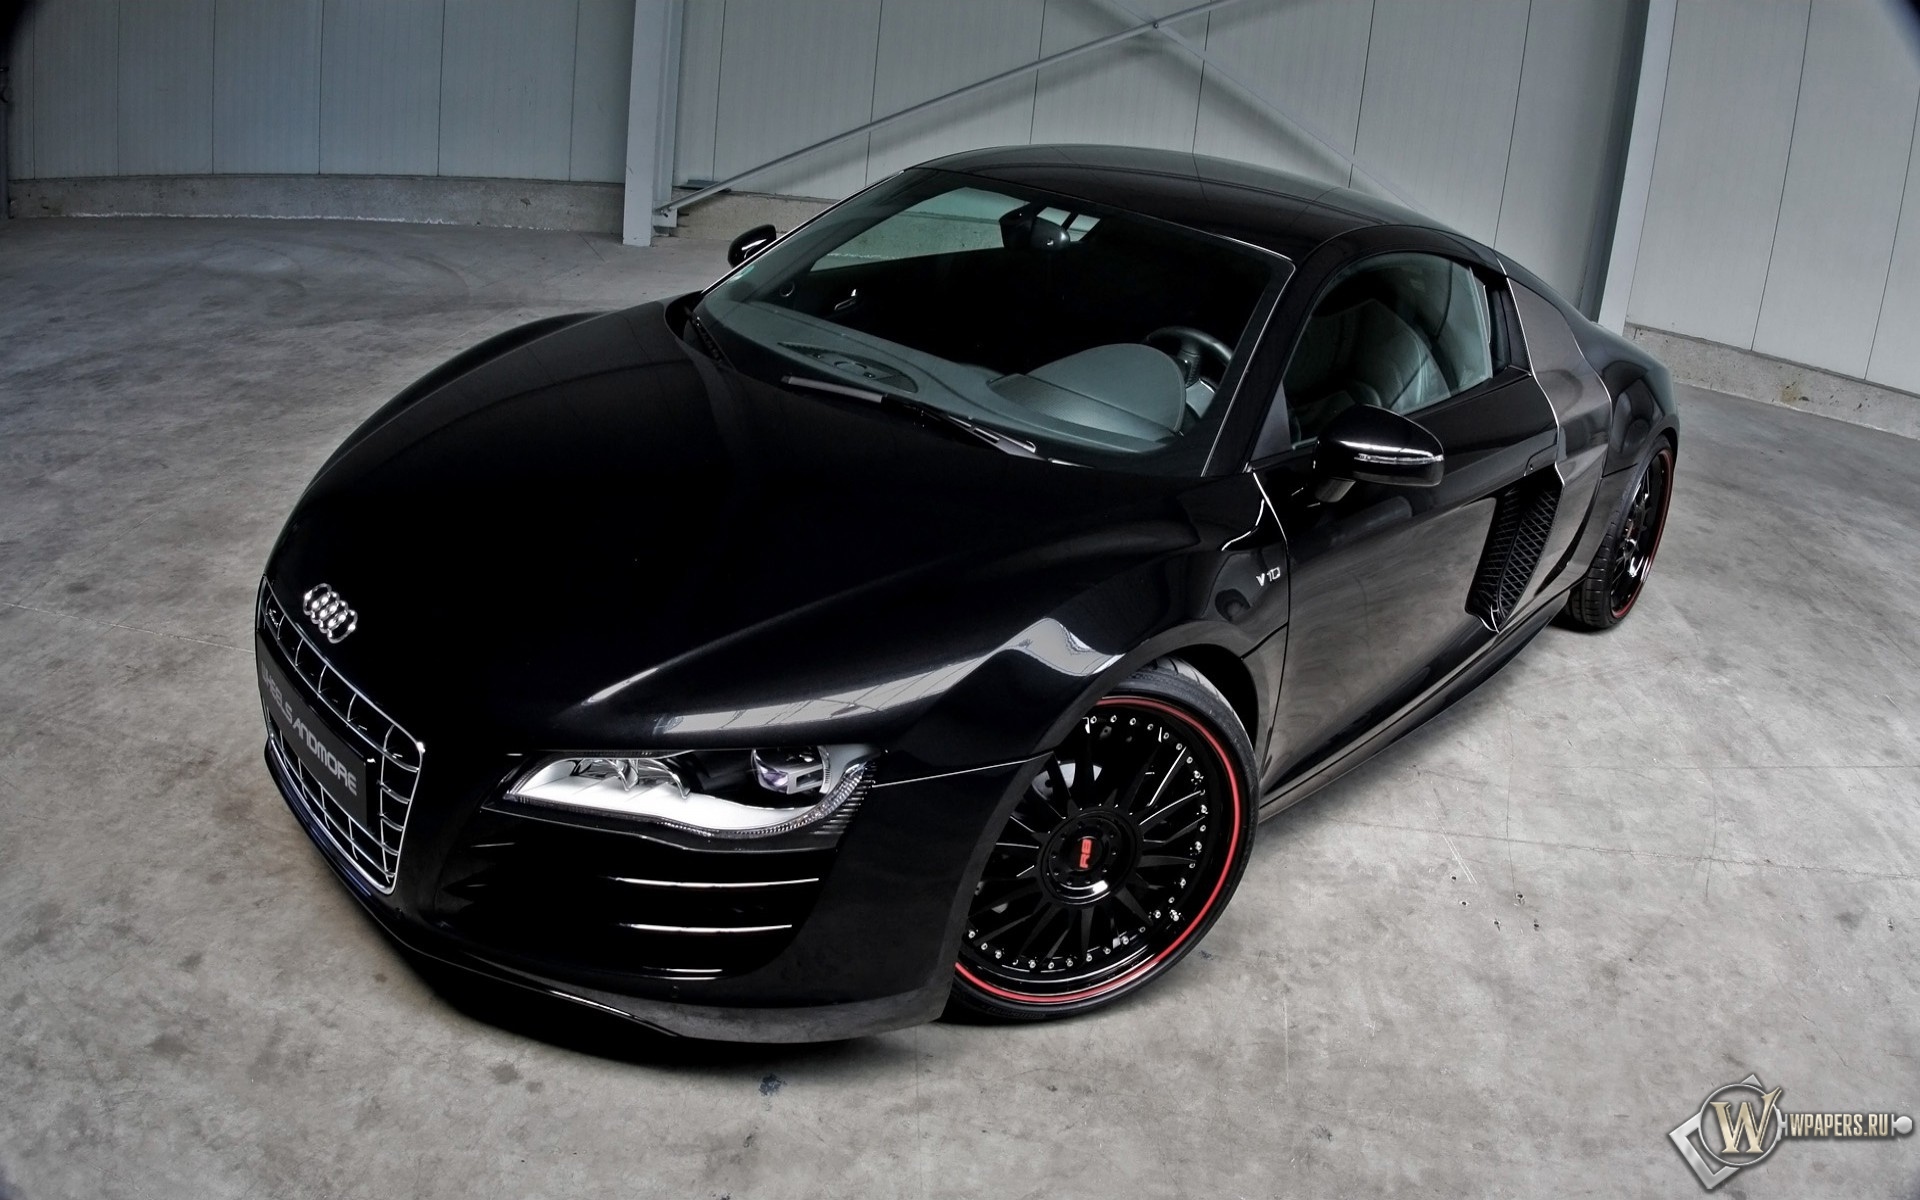 2011 Wheelsandmore Audi R8 V10 .6 - Front Angle Top 1920x1200